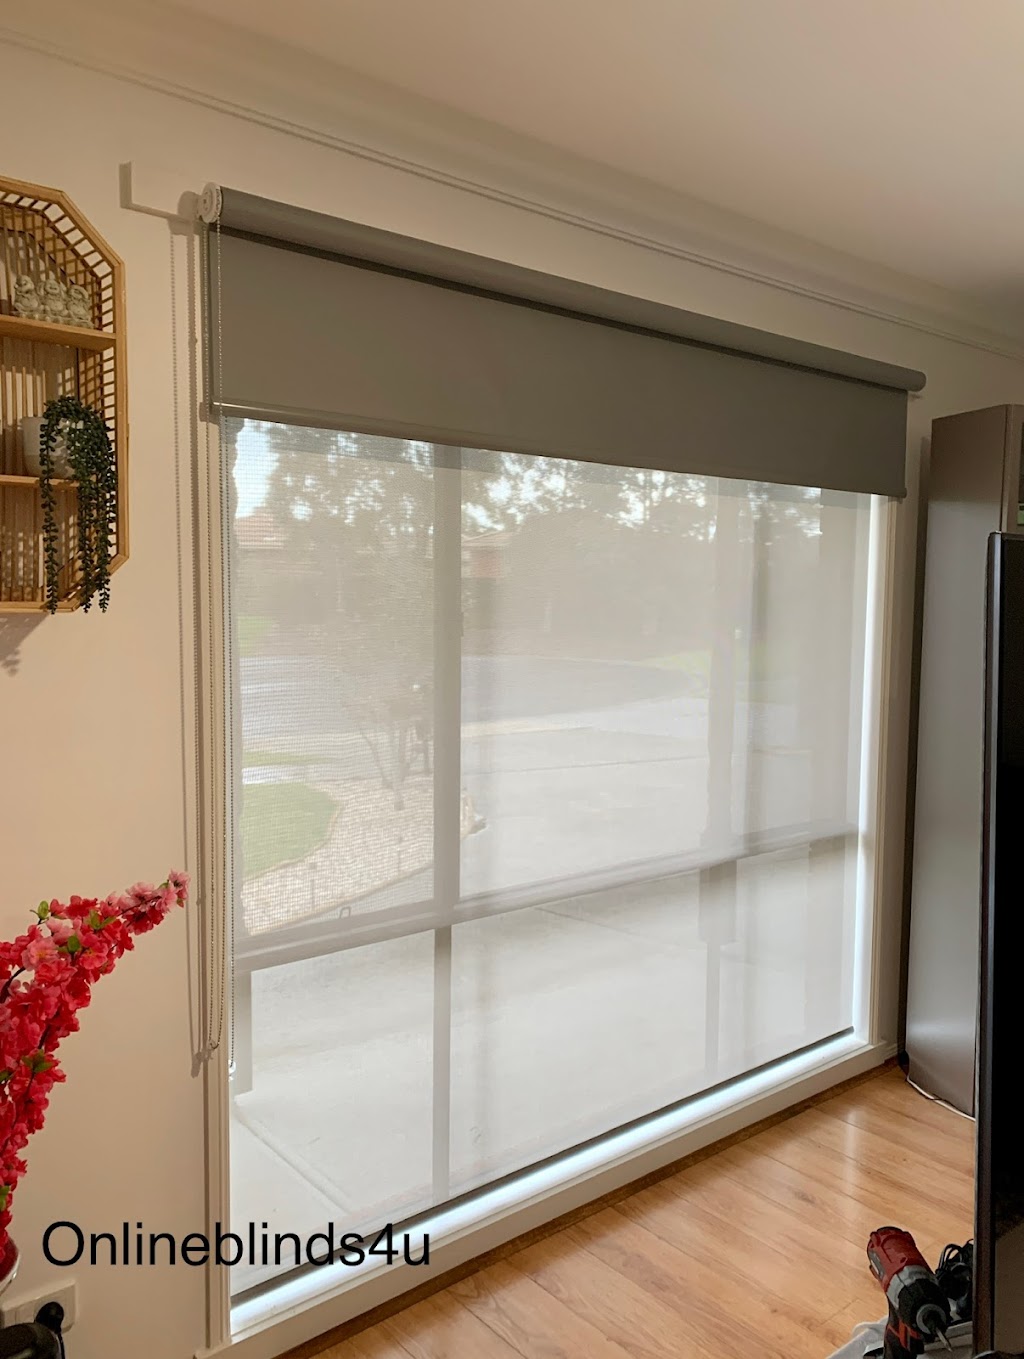 Onlineblinds4u | store | 9 Cann St, Clyde VIC 3978, Australia | 0422116630 OR +61 422 116 630